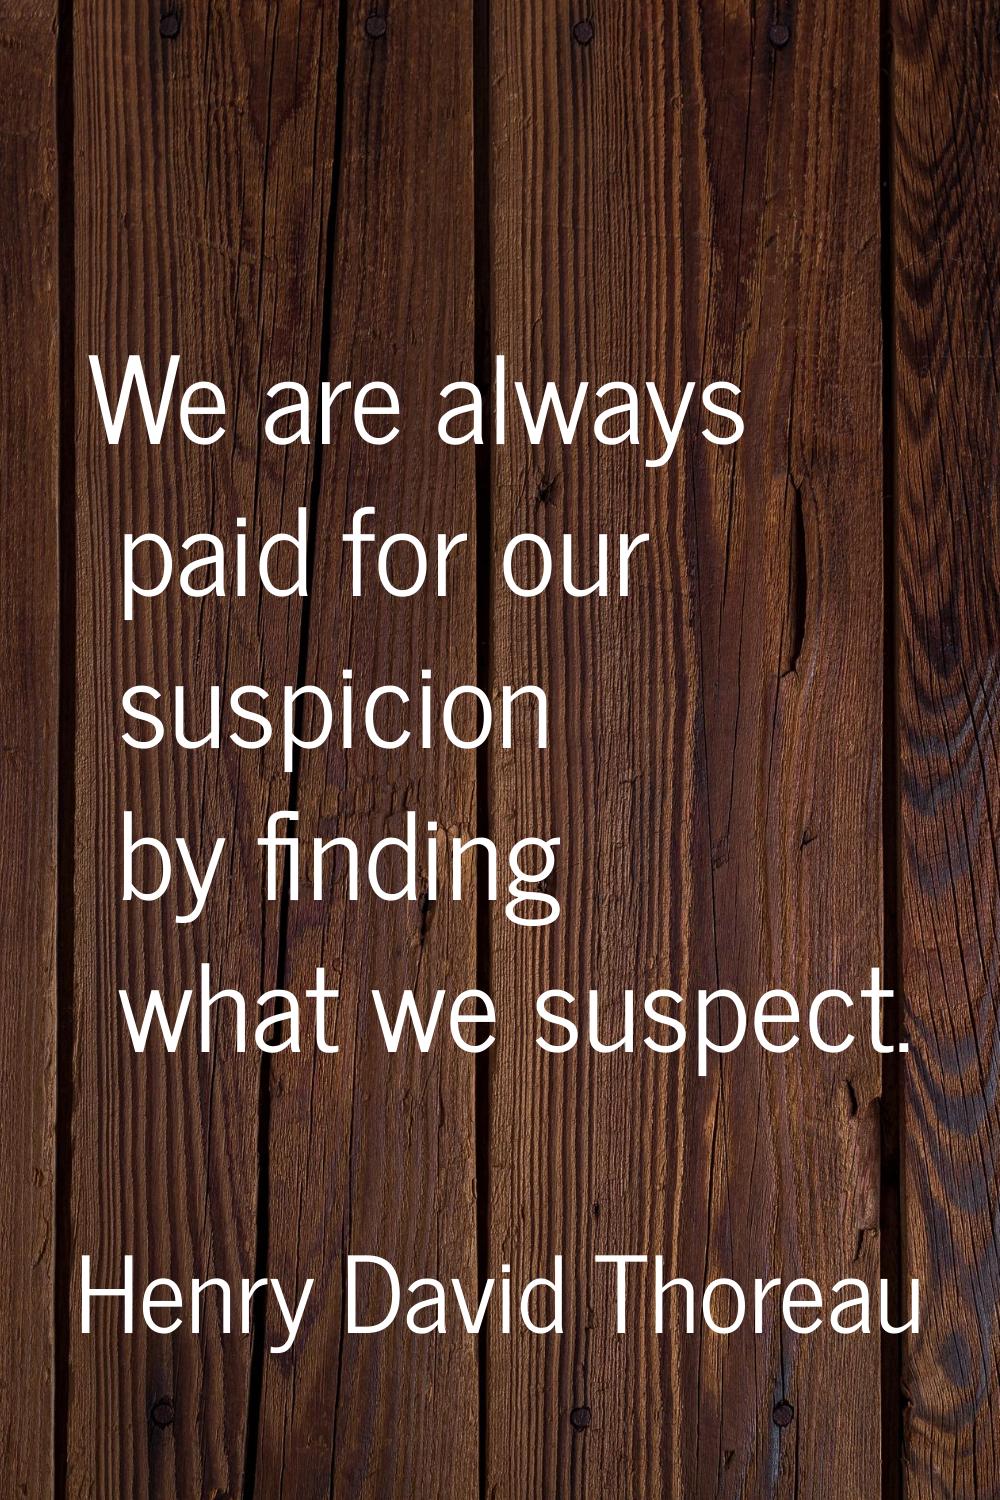 We are always paid for our suspicion by finding what we suspect.